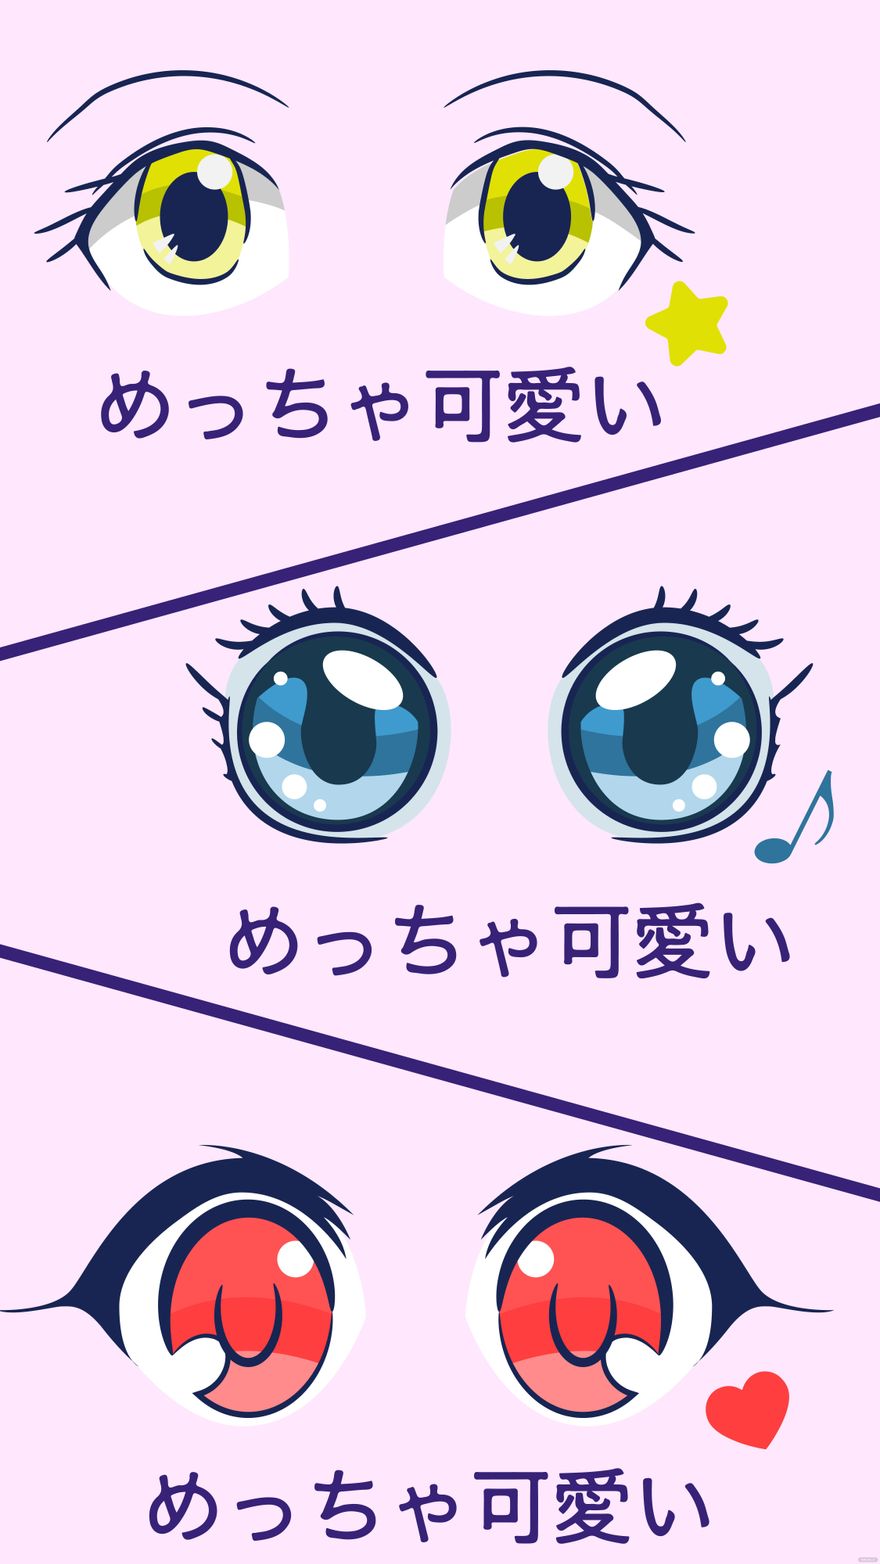 Free Anime Iphone Background in Illustrator, EPS, SVG, JPG, PNG